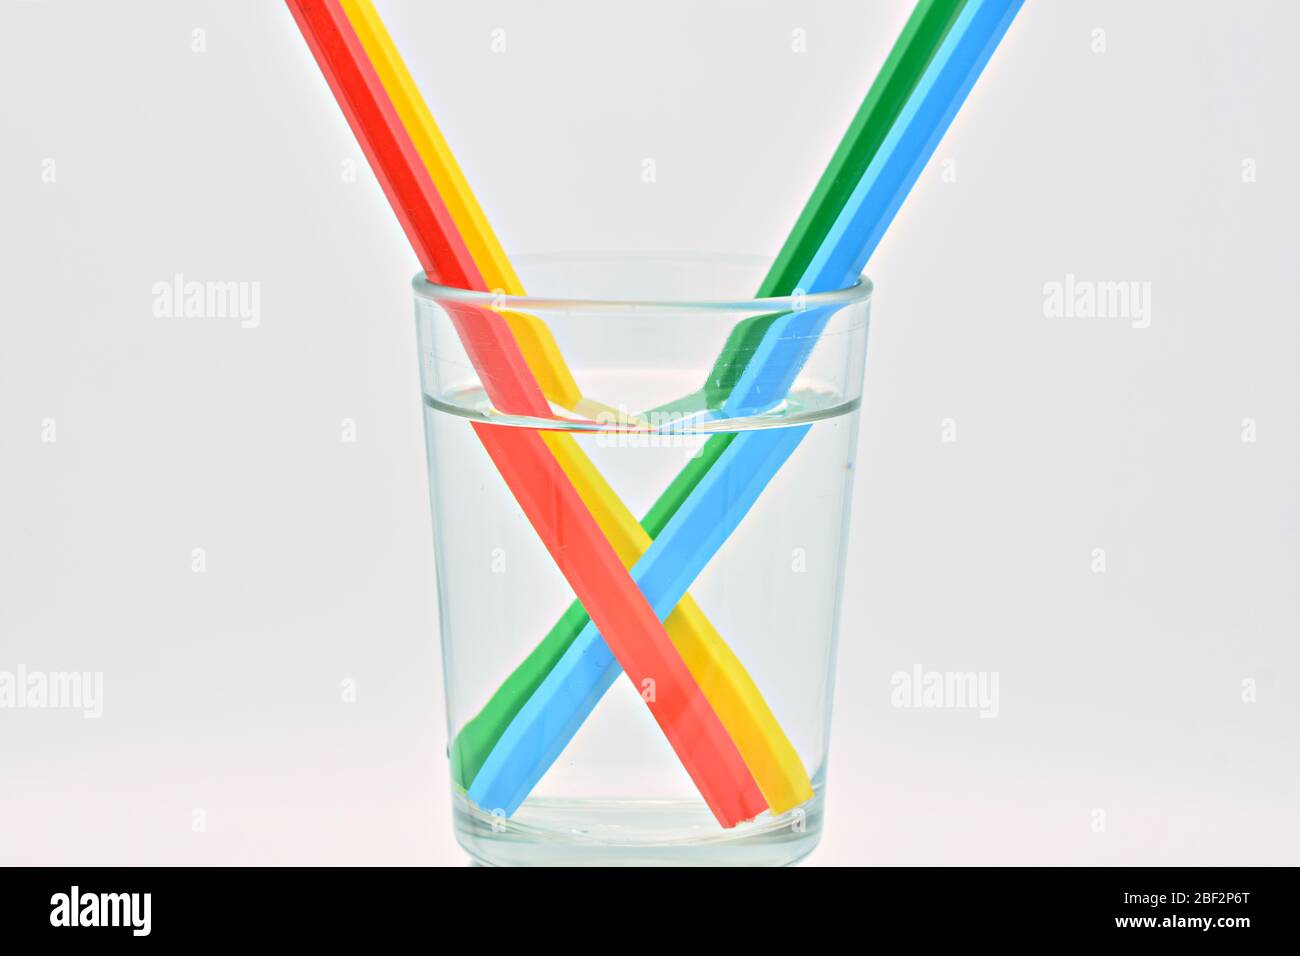 Blue, yellow, green and red colored pencils, inside a glass filled with water, explanation refraction of light Stock Photo